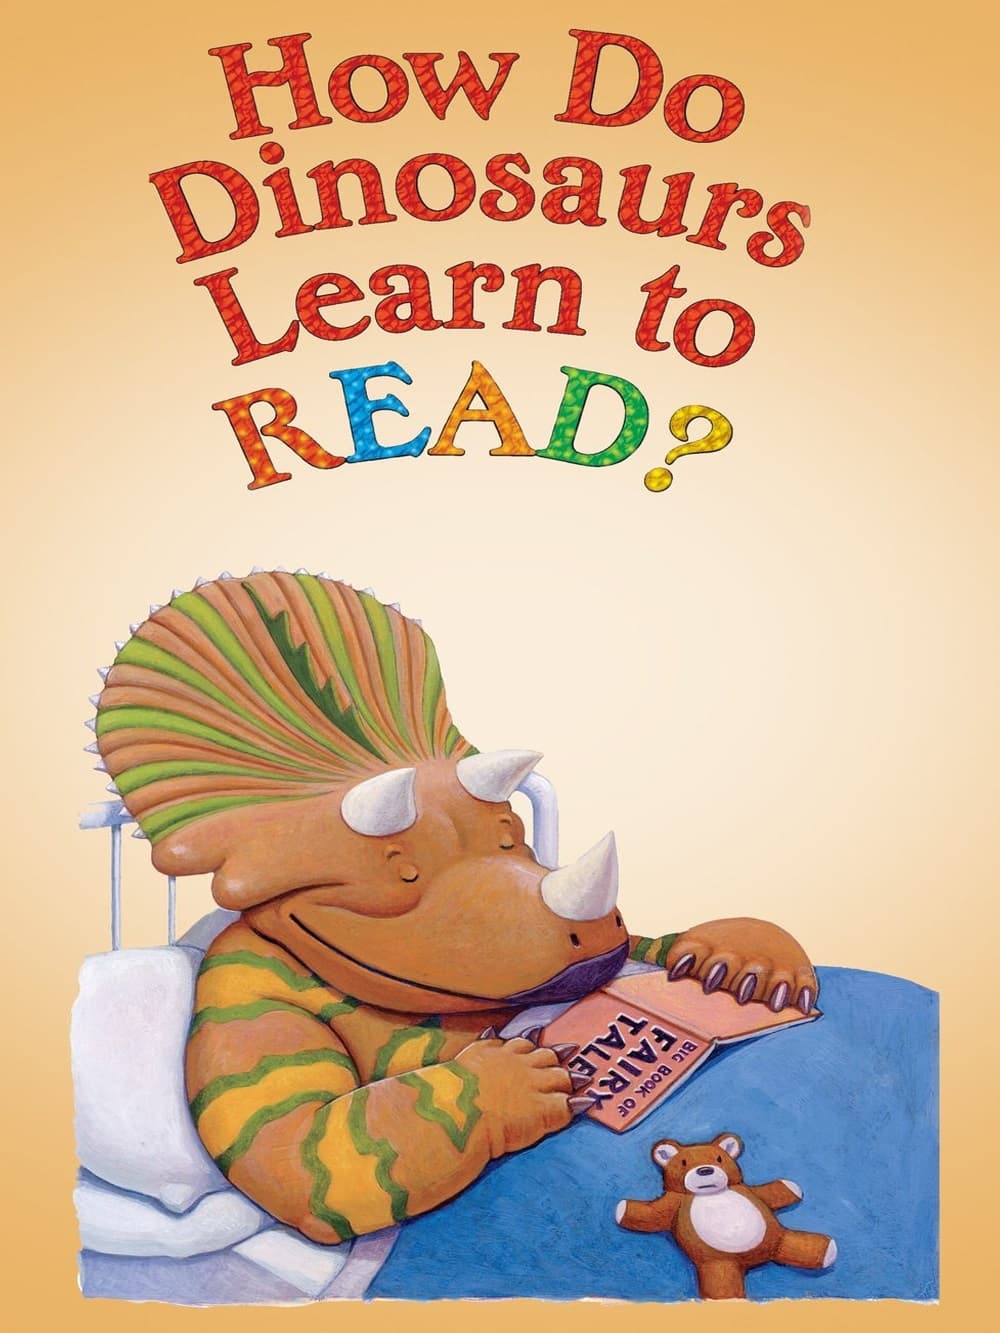 How Do Dinosaurs Learn to Read